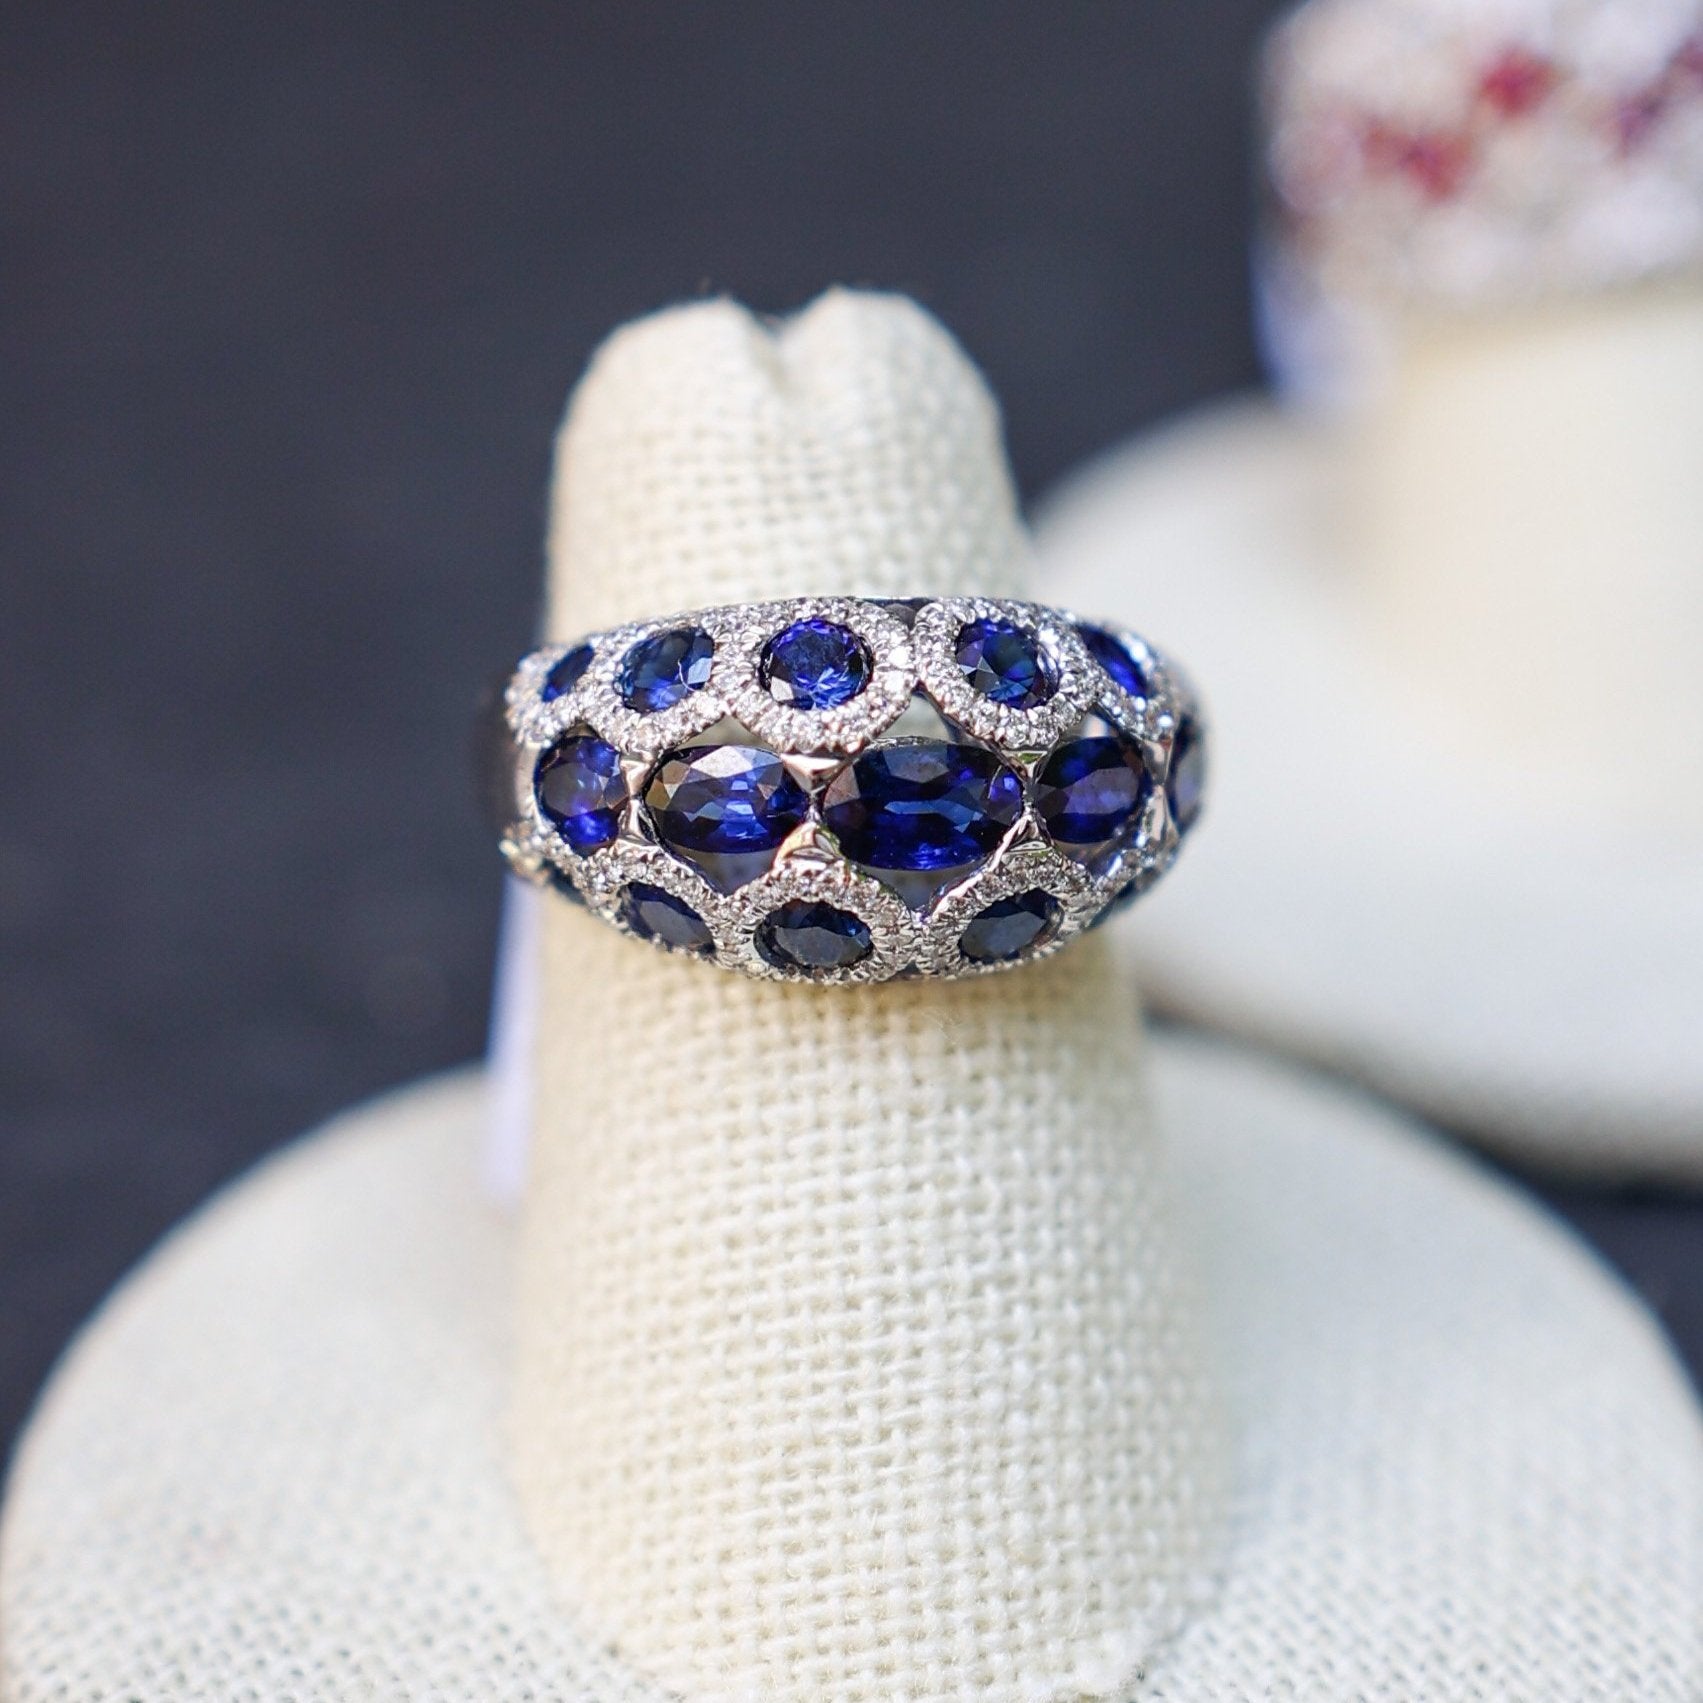 18K White Gold Multi-Stone Diamond and Sapphire Ring handmade by Jewel in the Sea Nantucket